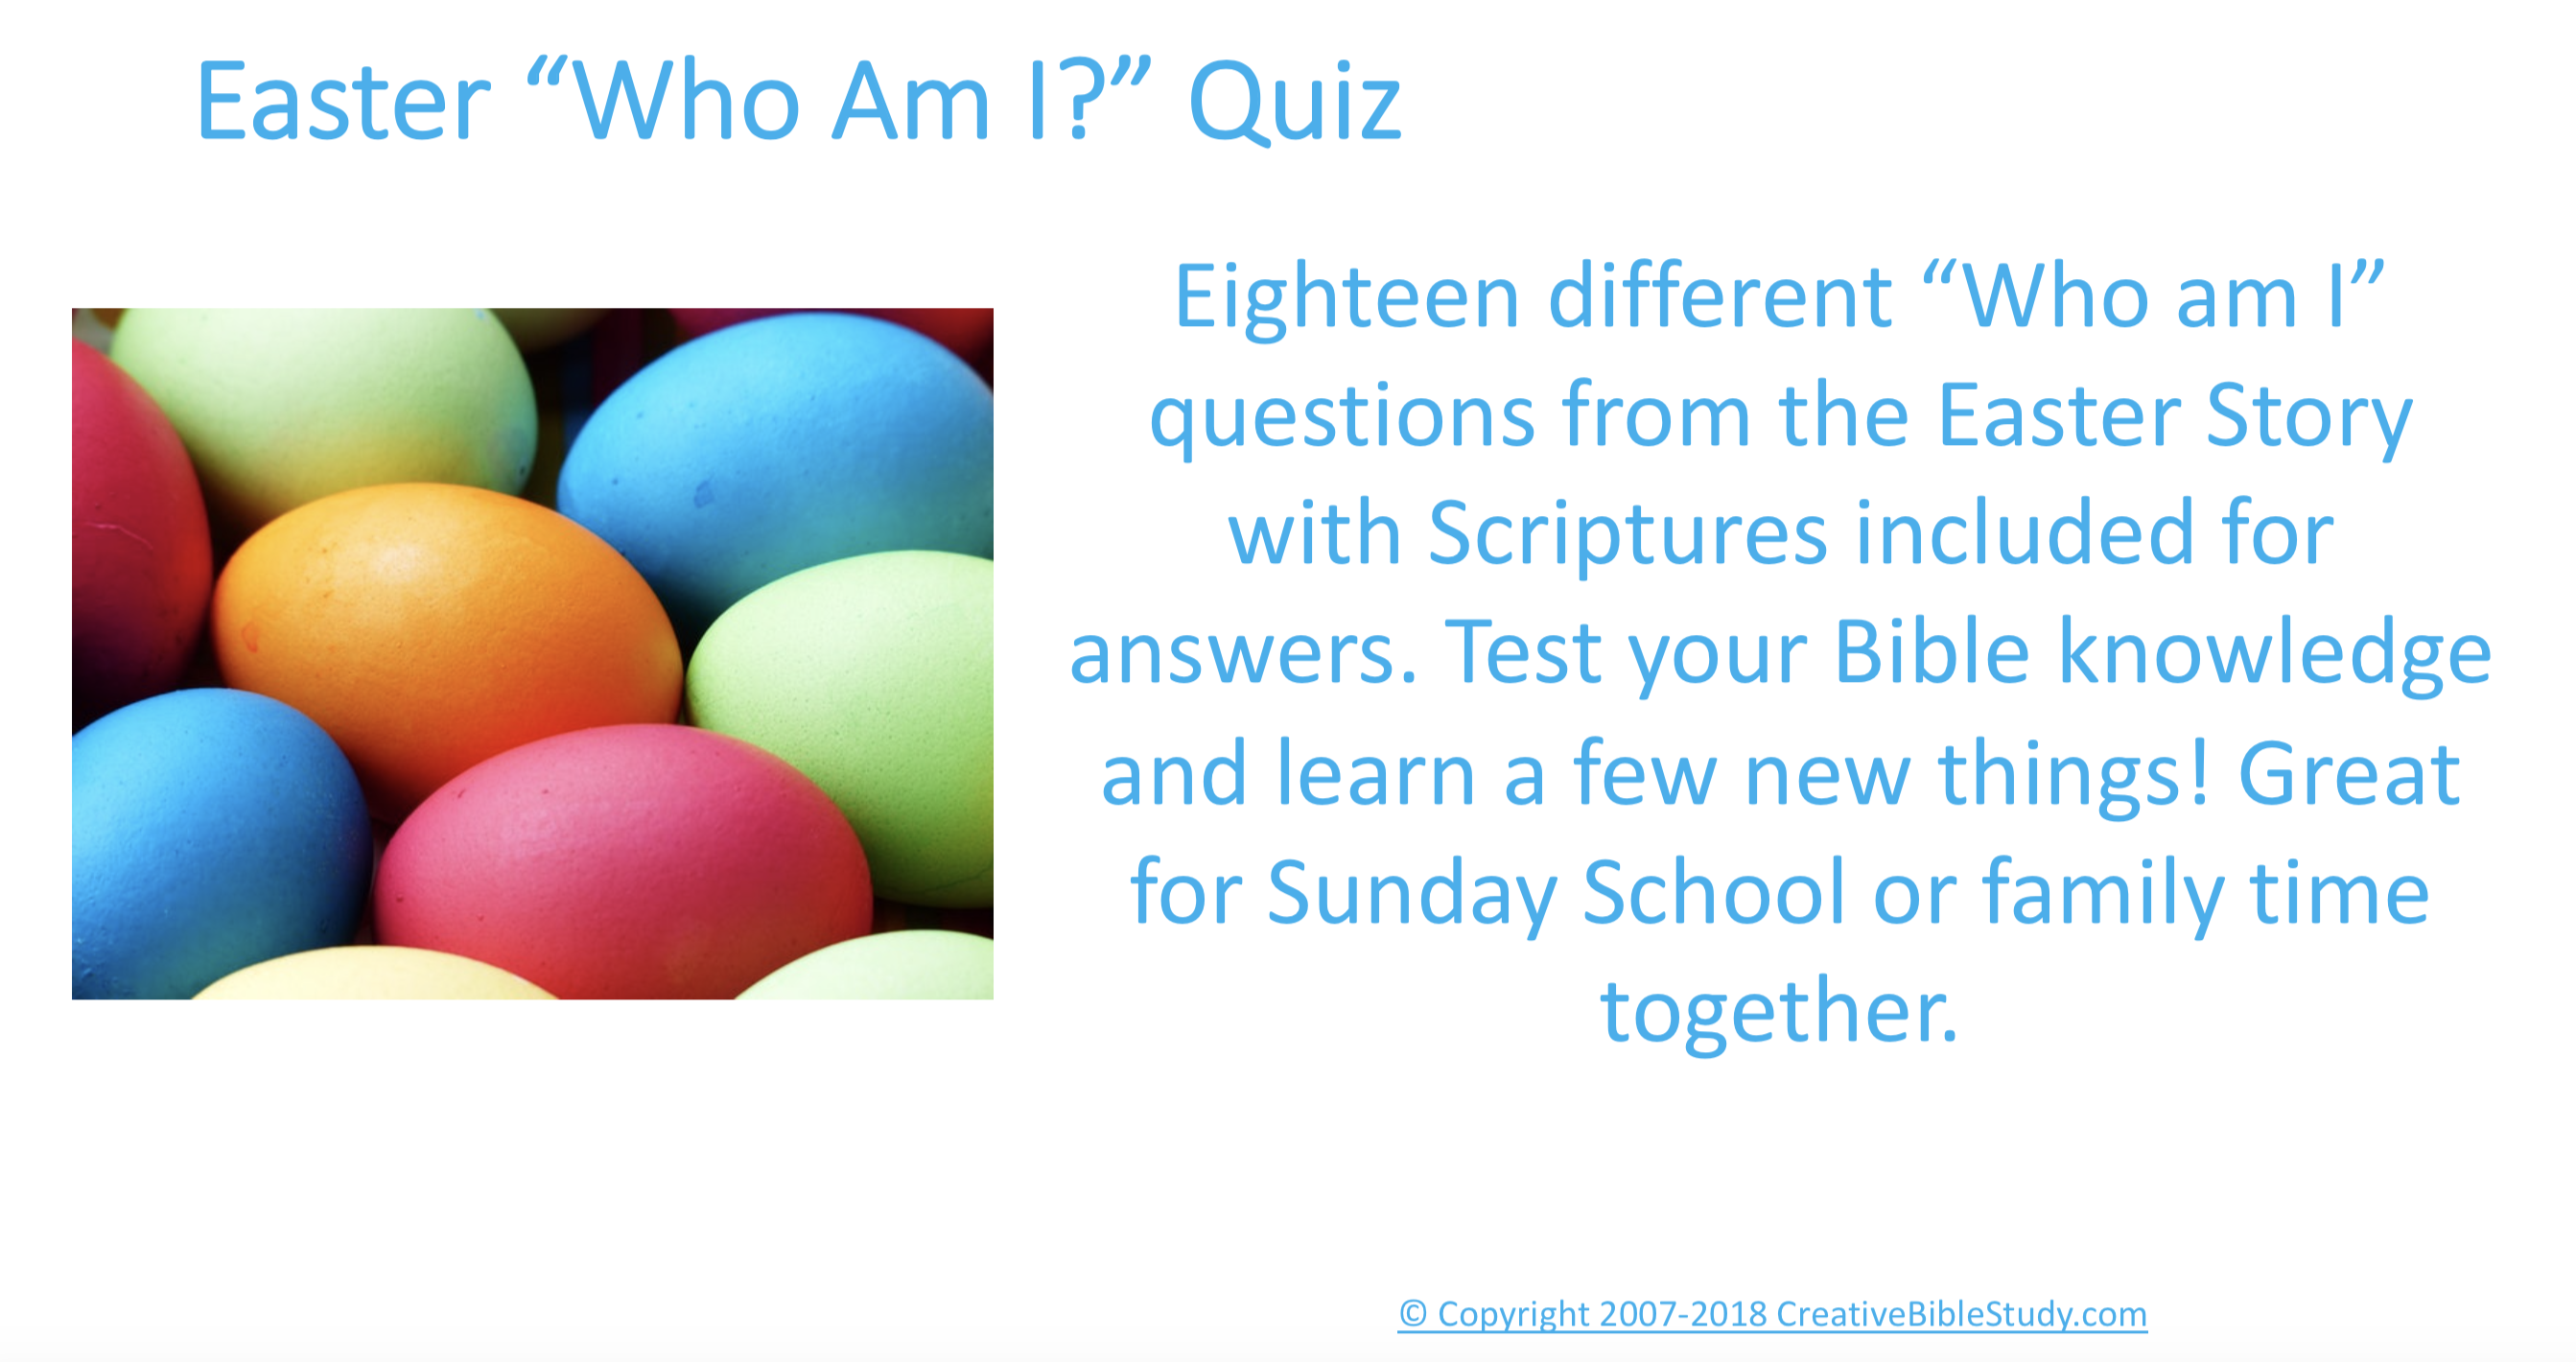 An Easter Quiz Game - Kids, Youth & Adults